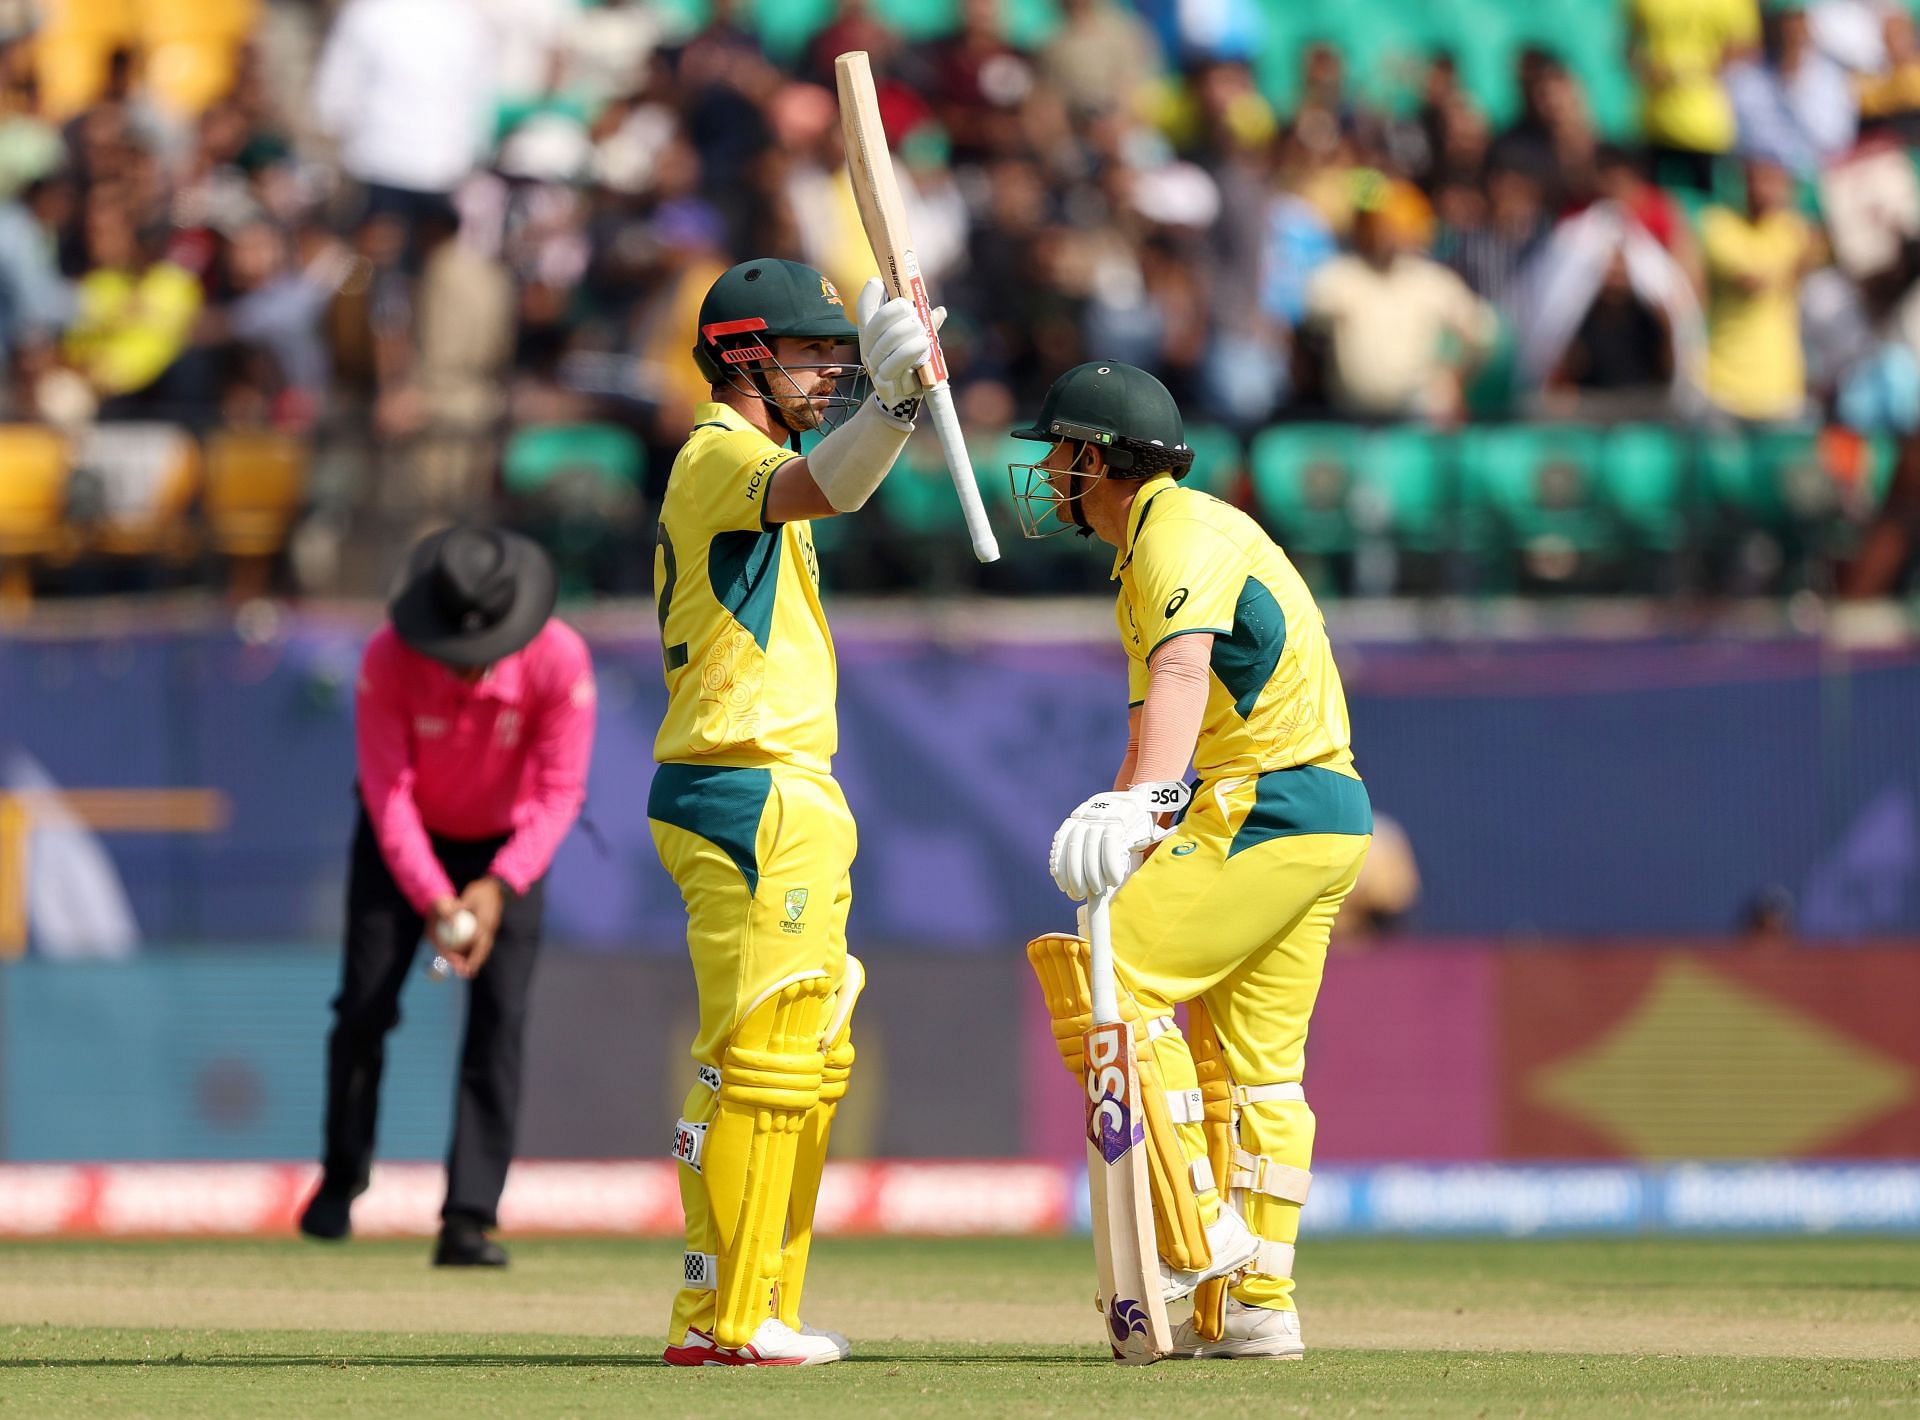 The duo form a destructive opening pair for Australia at the top of the order.